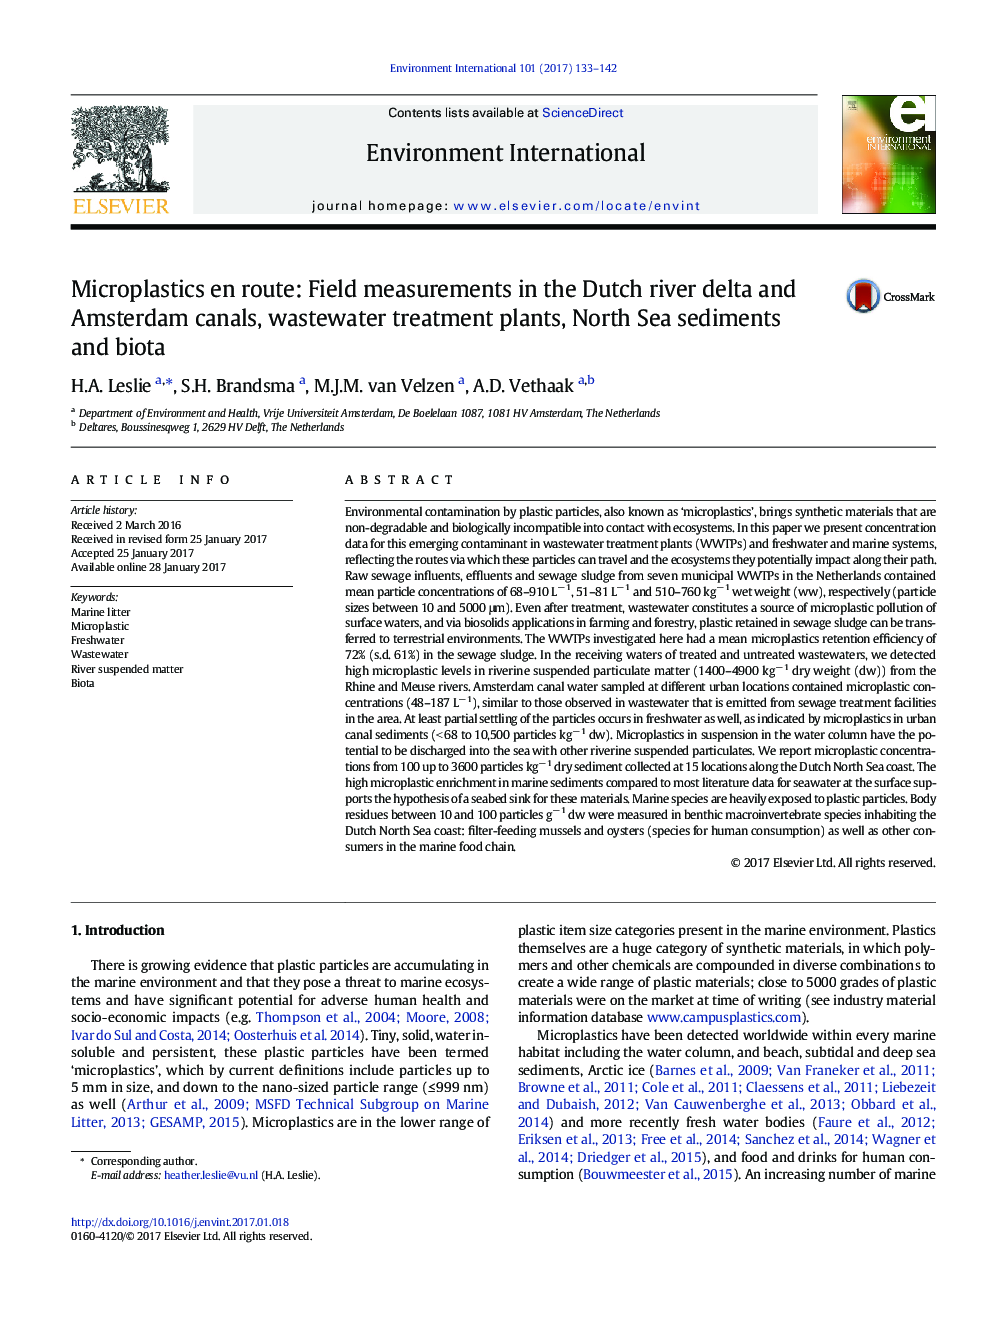 Microplastics en route: Field measurements in the Dutch river delta and Amsterdam canals, wastewater treatment plants, North Sea sediments and biota